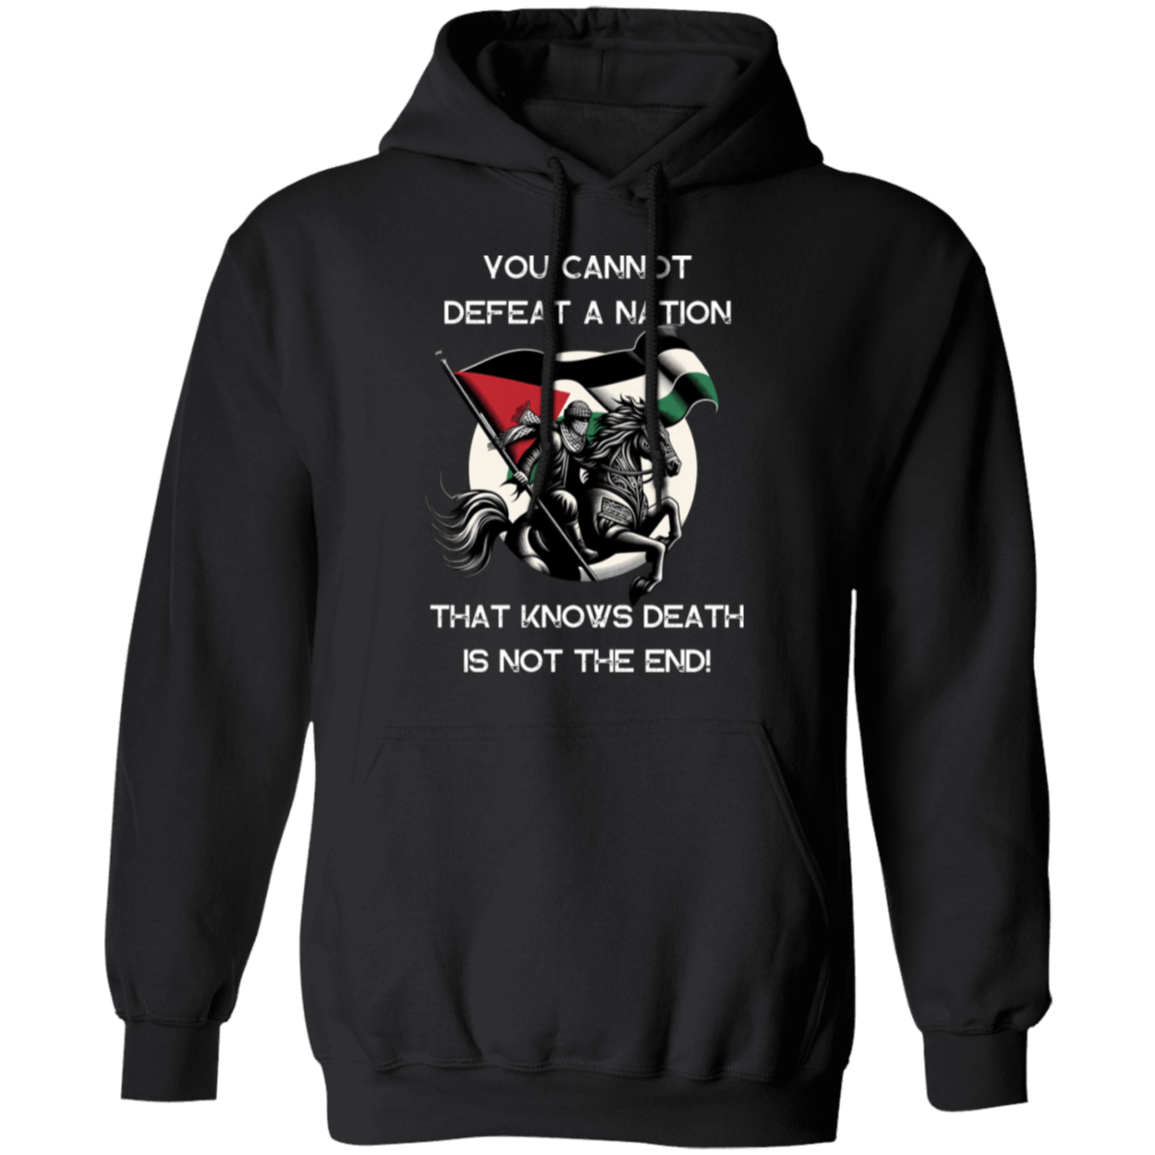 You Can't Defeat a Nation Palestine Hoodie-Front Design